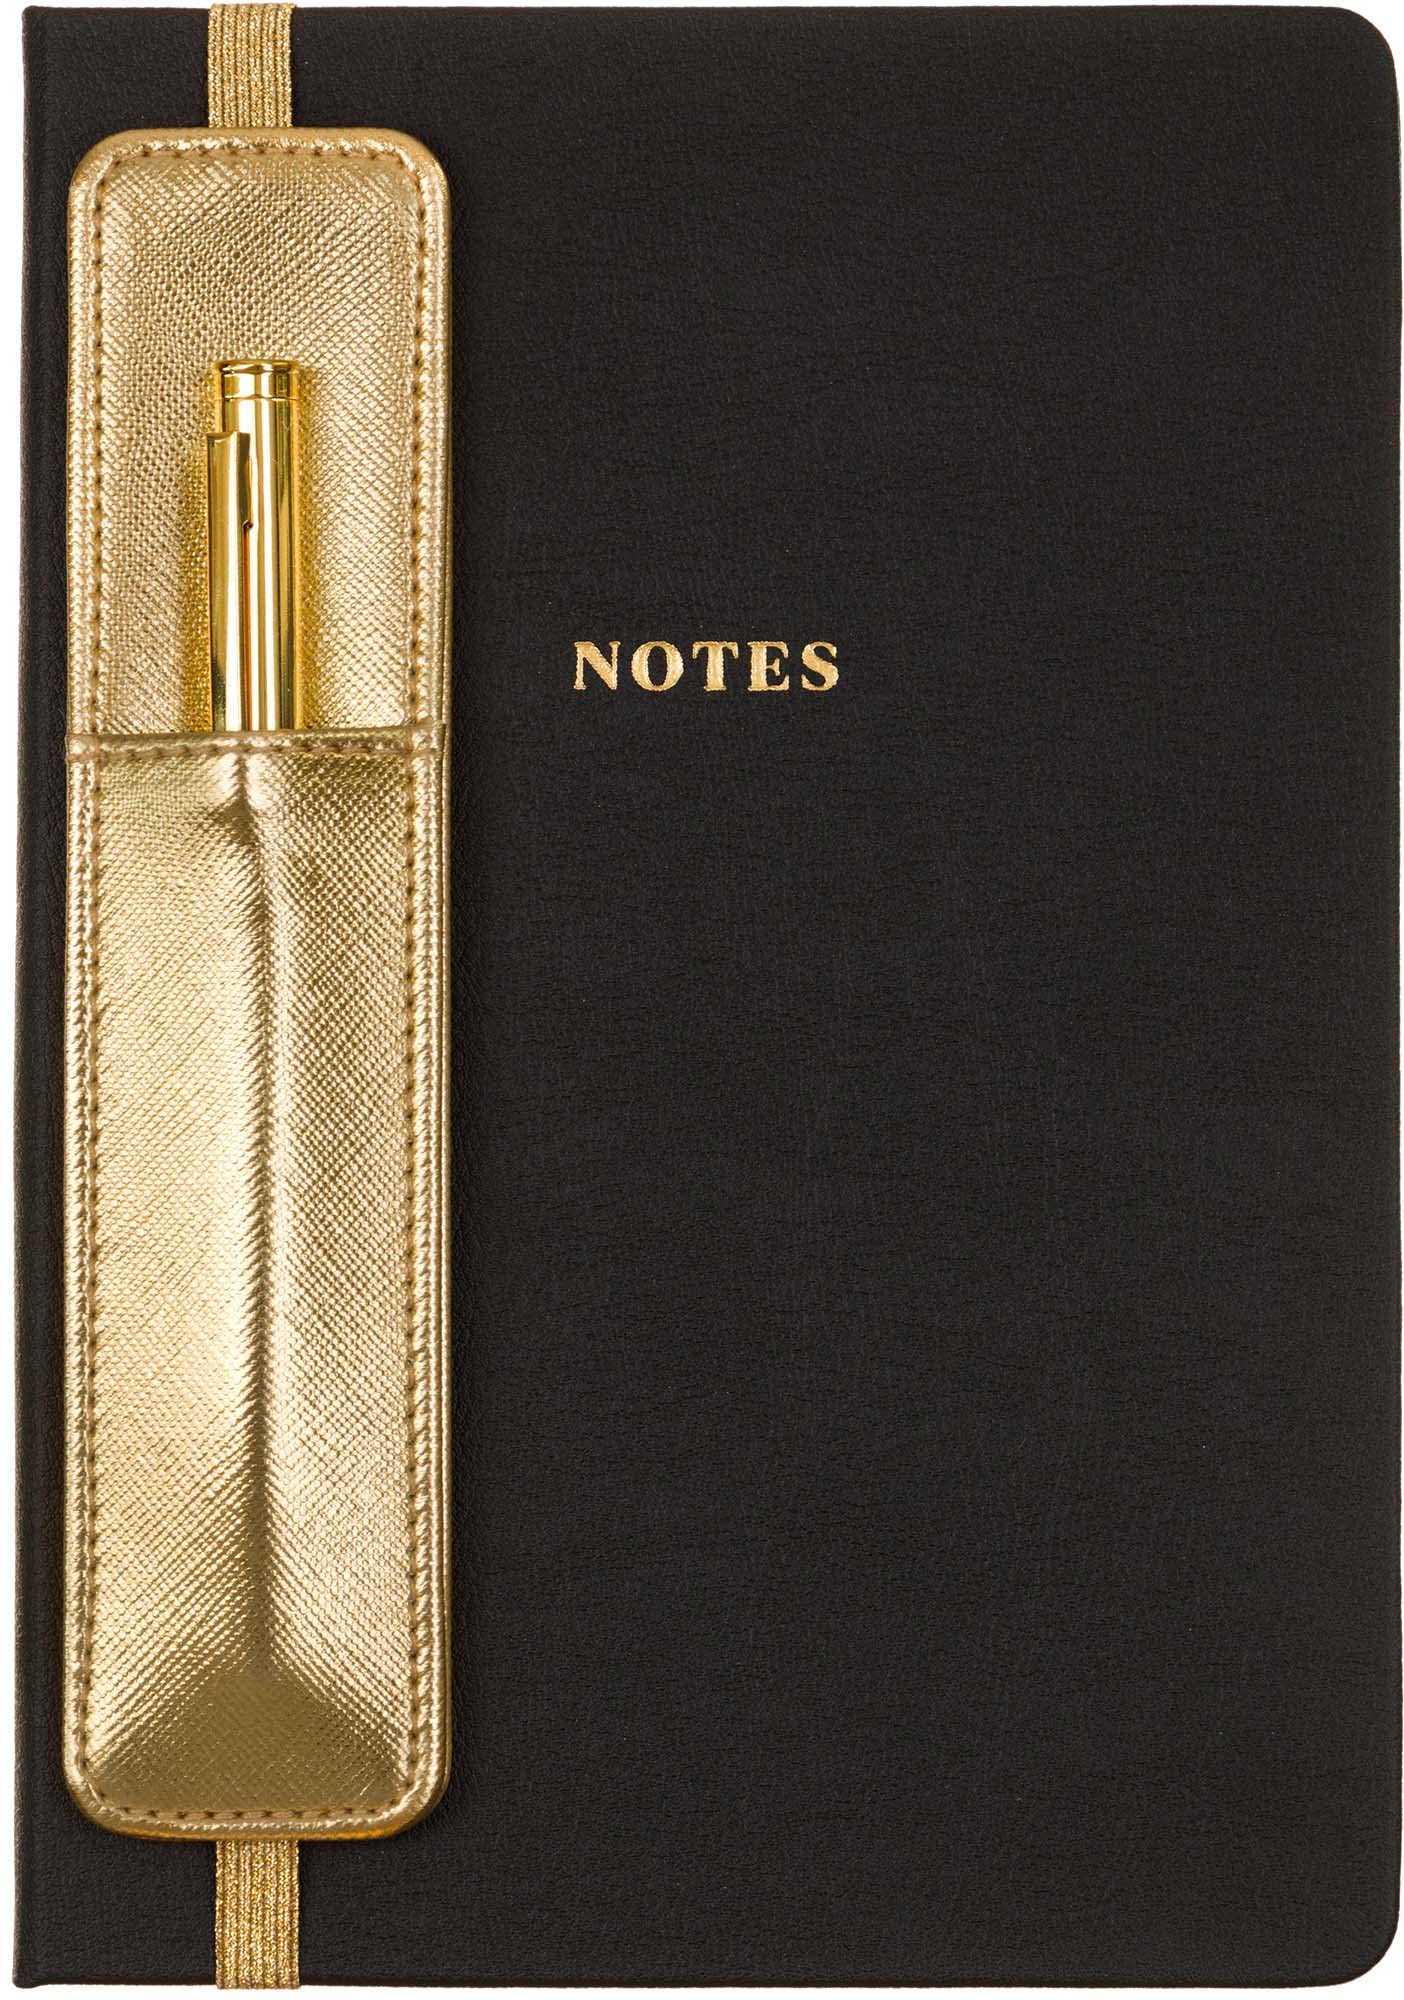 Eccolo Medium Lined Journal Notebook and Pen